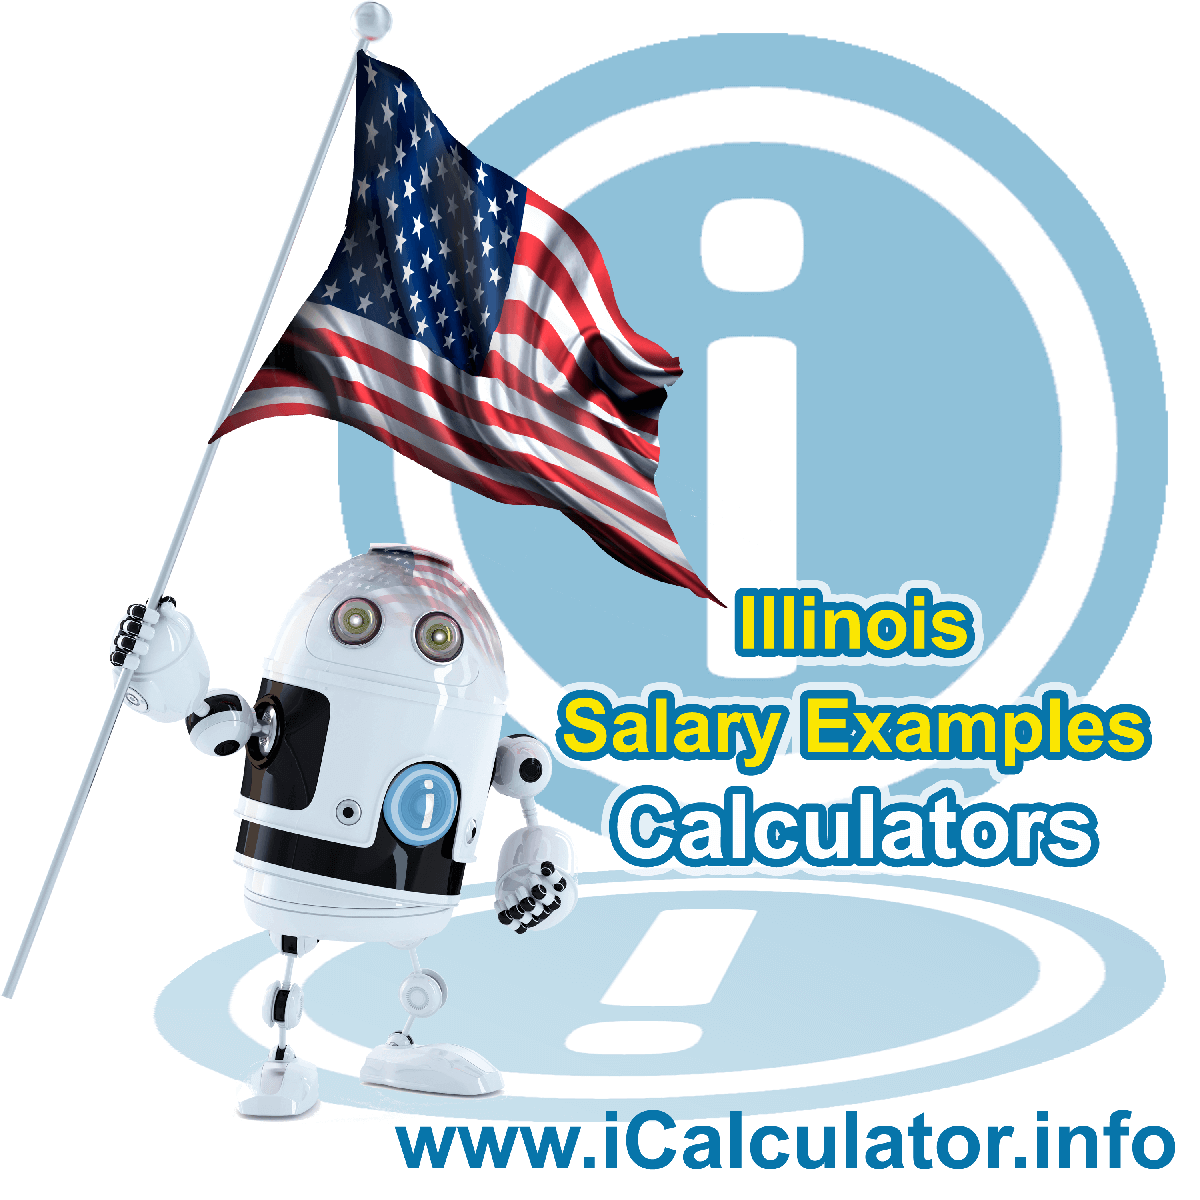 Illinois Salary Example for $ 40,000.00 in 2023 | iCalculator™ | $ 40,000.00 salary example for employee and employer paying Illinois State tincome taxes. Detailed salary after tax calculation including Illinois State Tax, Federal State Tax, Medicare Deductions, Social Security, Capital Gains and other income tax and salary deductions complete with supporting Illinois state tax tables 